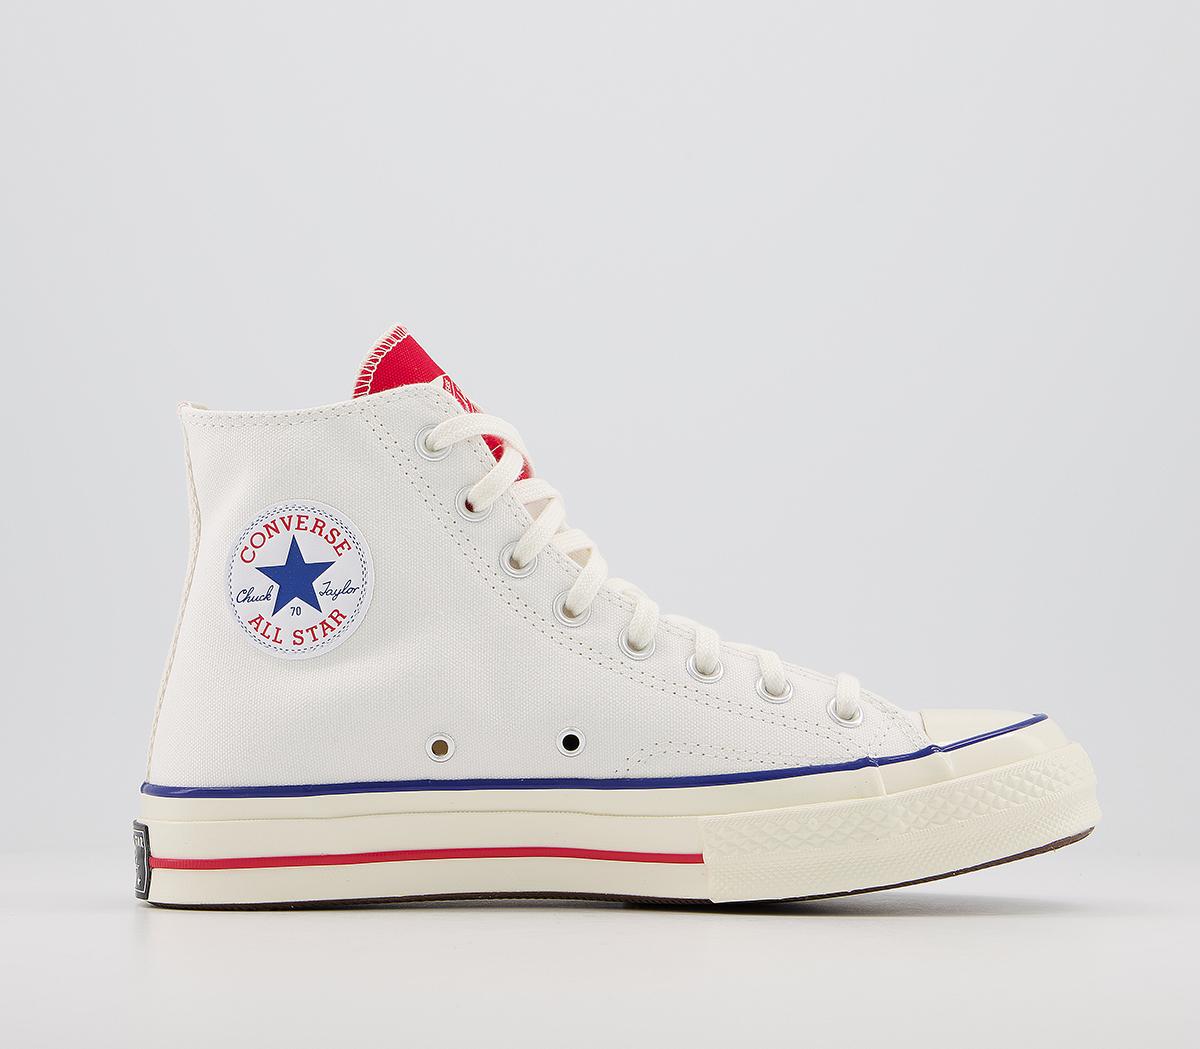 ConverseAll Star Hi 70s TrainersWhite University Red Egret Twisted Tongue